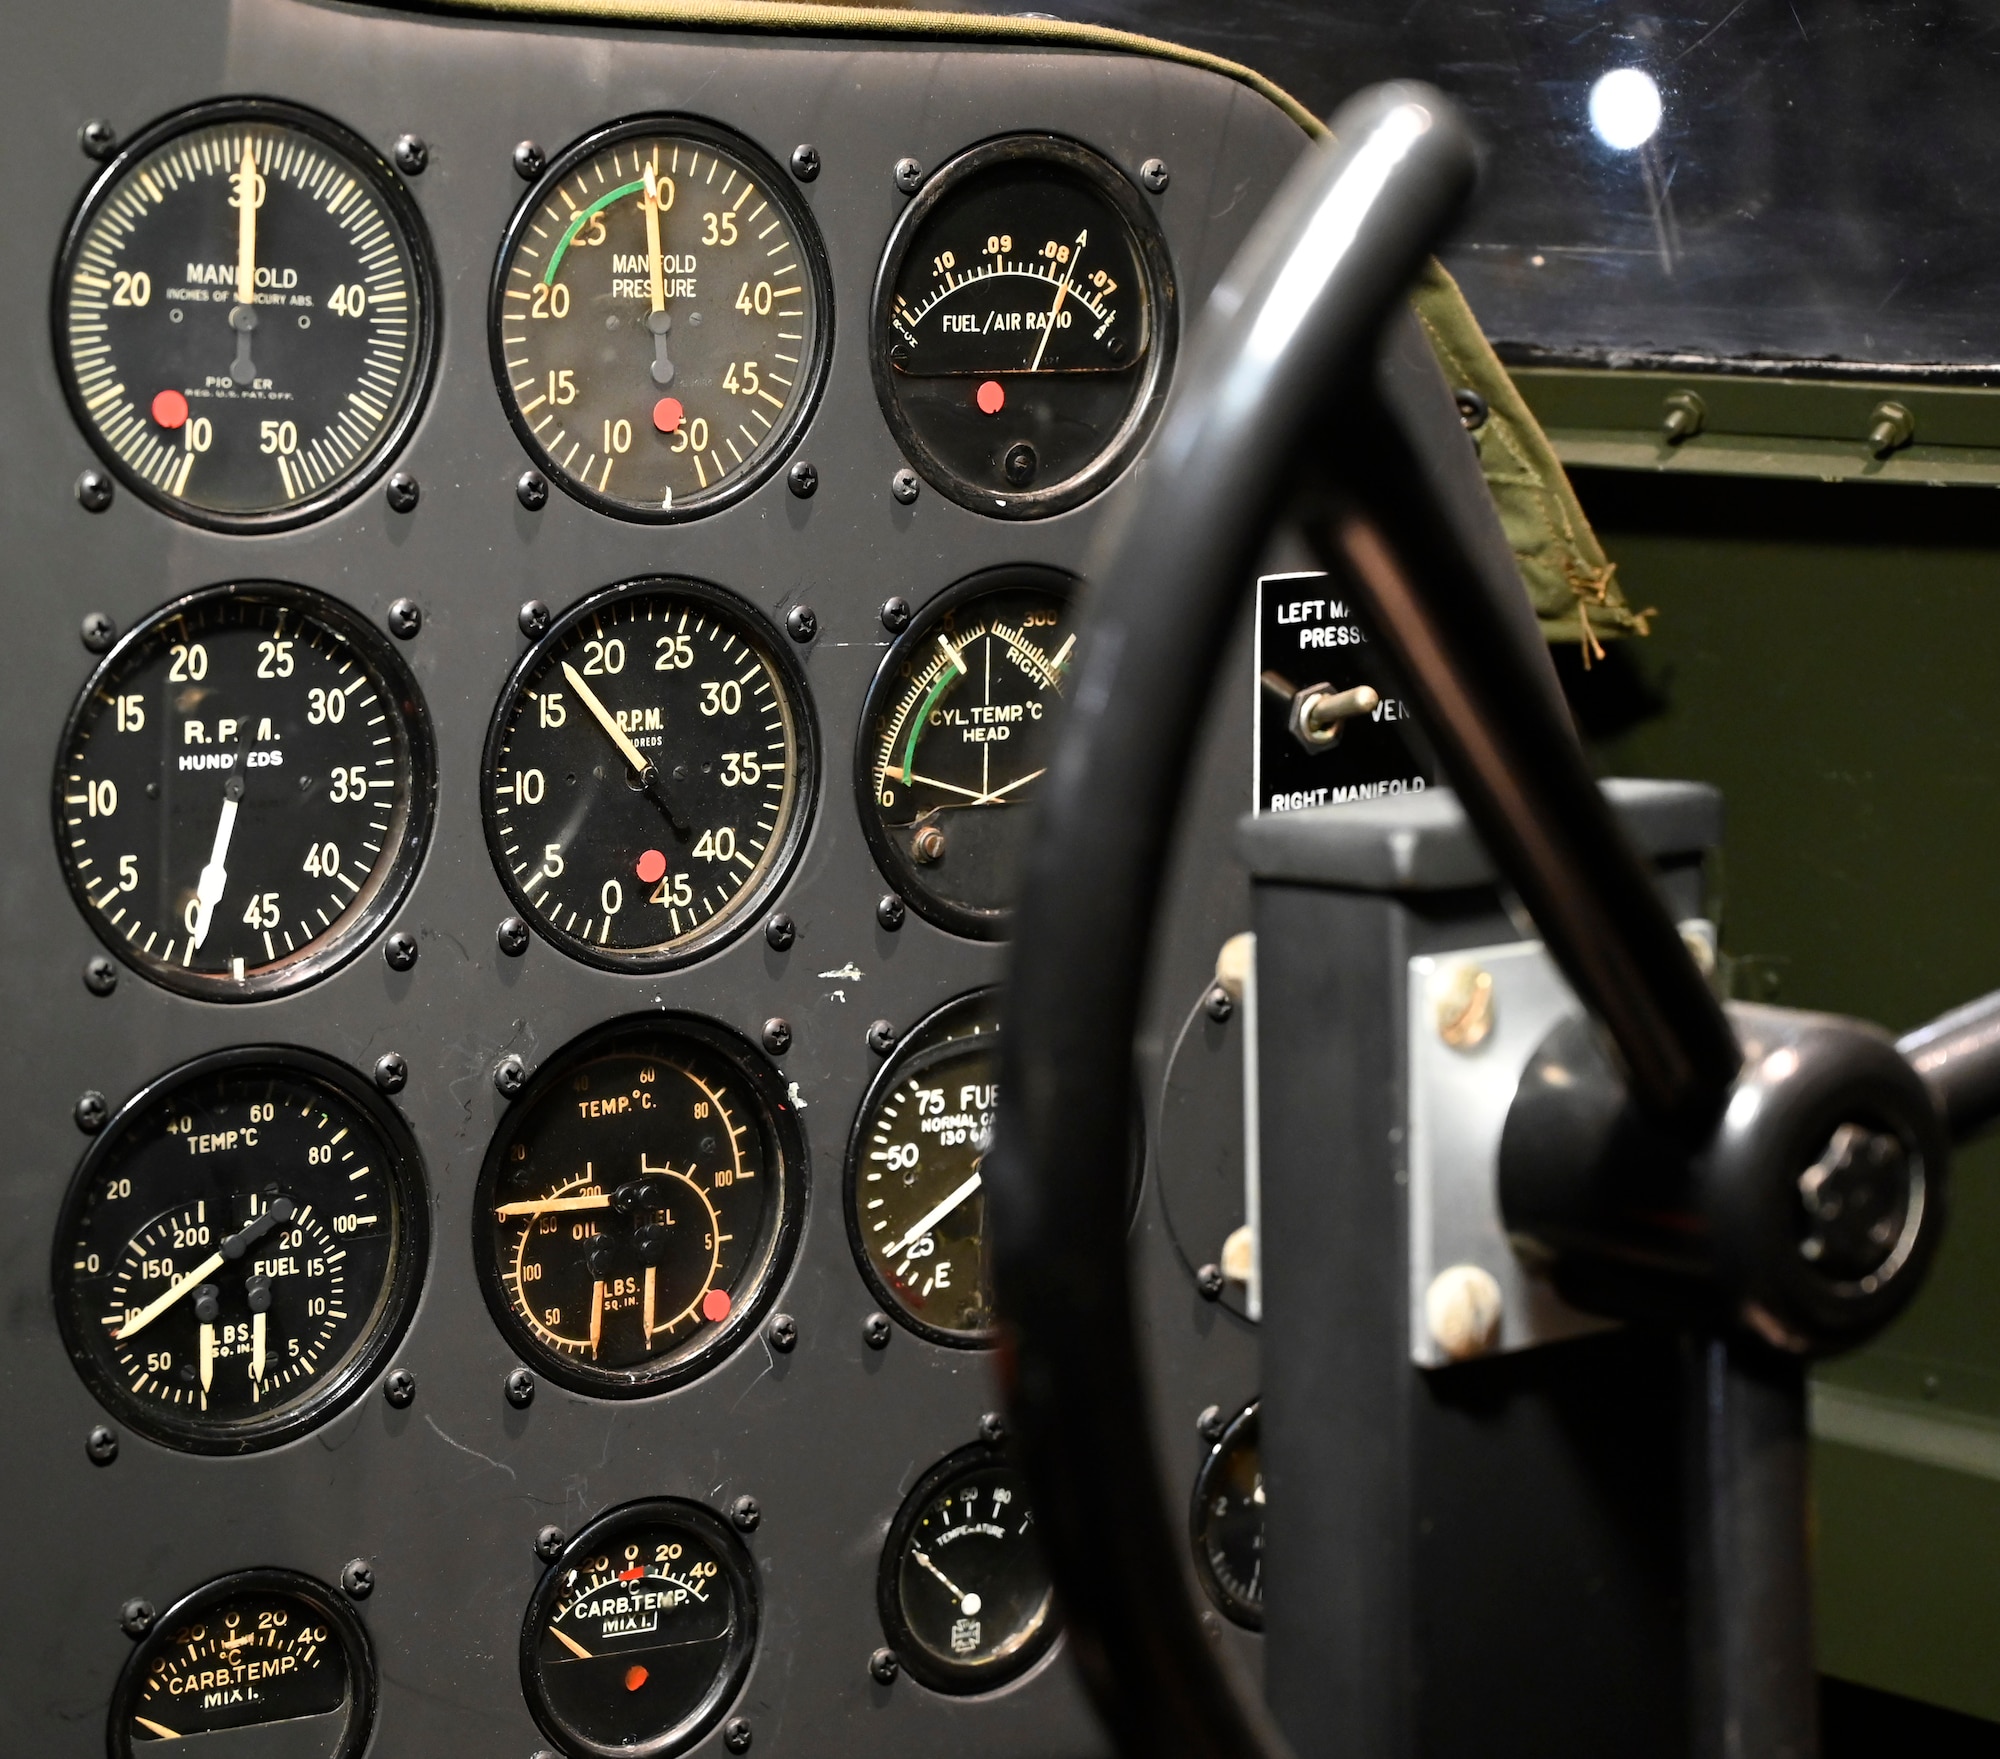 Interior view of the Curtiss AT-9 Jeep/Fledgling at the National Museum of the U.S. Air Force World War II Galllery.